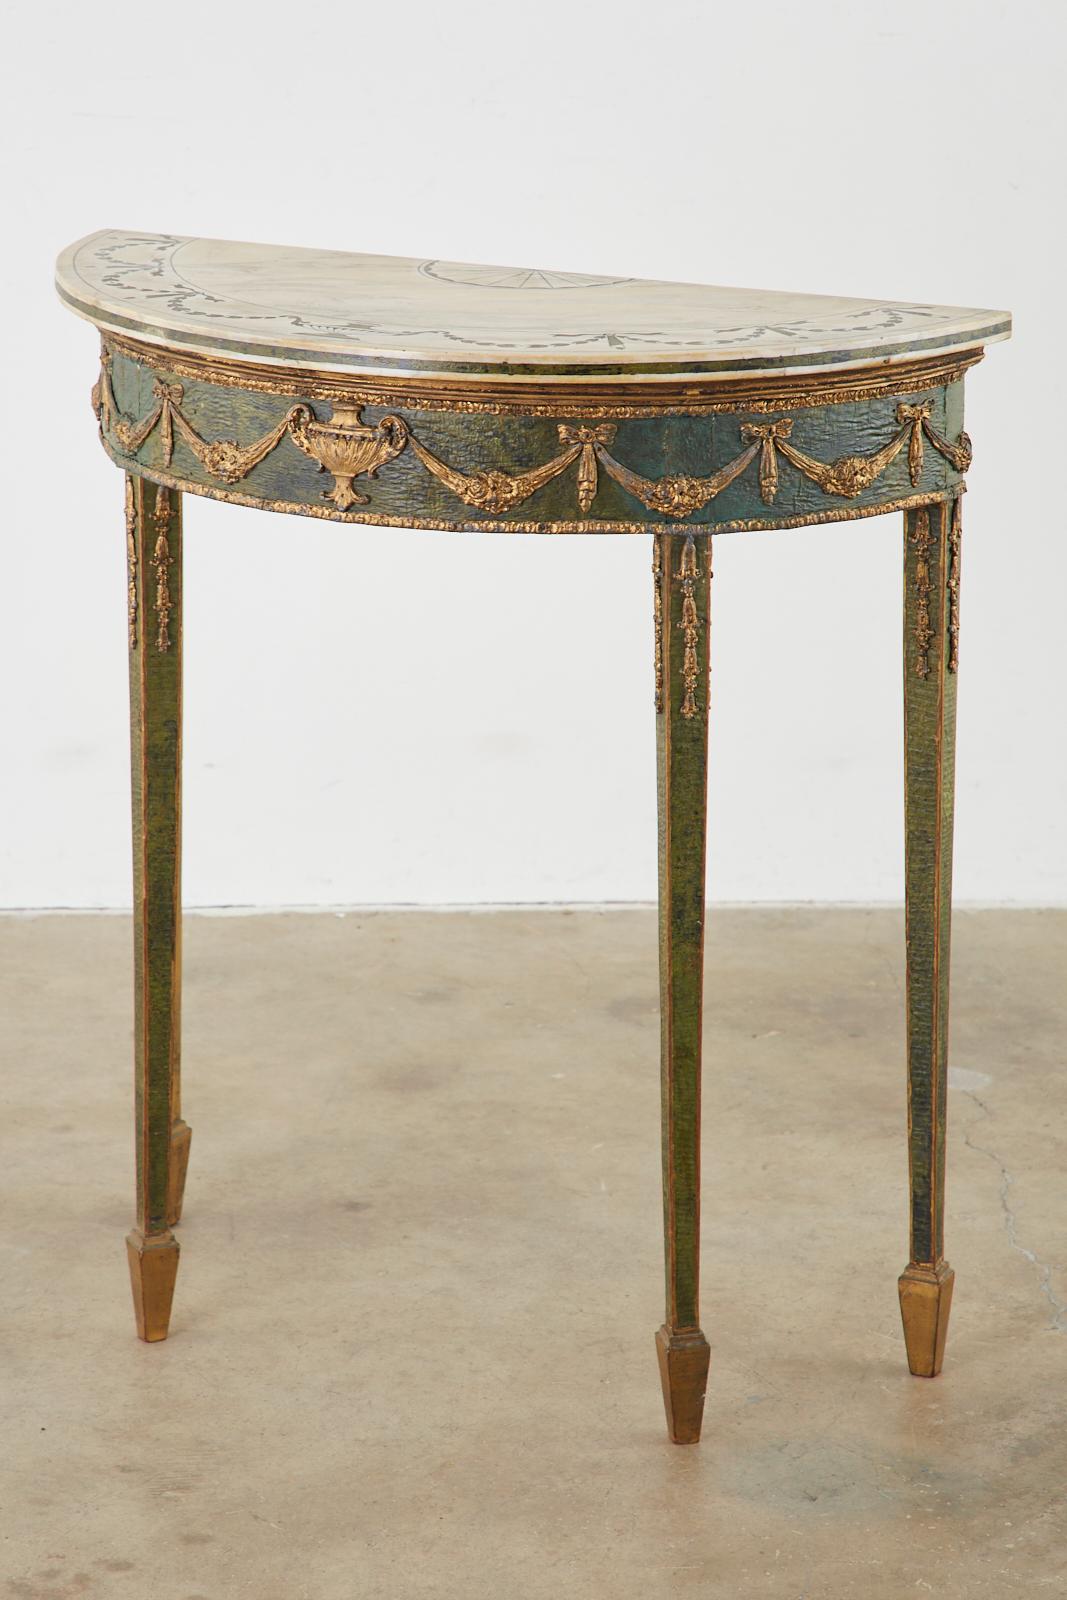 Fine pair of matched neoclassical Adamesque painted and ormolu bronze mounted demilune console tables. Each frieze centering a gilt bronze neoclassical urn flanked by swags of floral garlands and bows. The four elegant legs mounted with additional